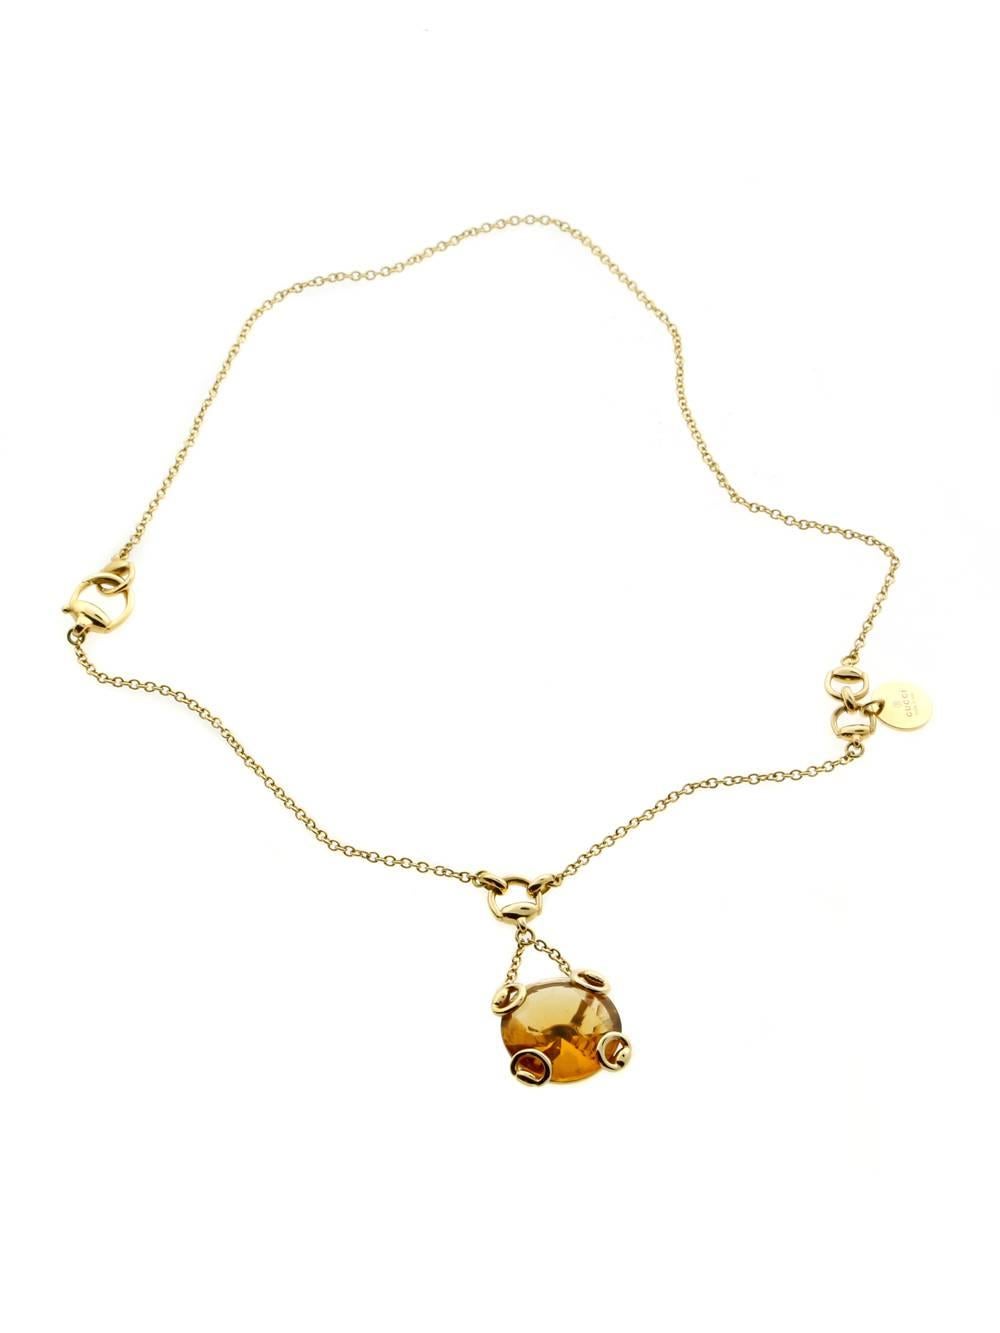 This stunning necklace by Gucci features a large faceted Citrine engulfed in a timeless 18-karat yellow gold Horsebit Motif

Length: 17″ followed by a drop of 1.75″
Citrine: 18mm in diameter

Inventory ID: 0000282